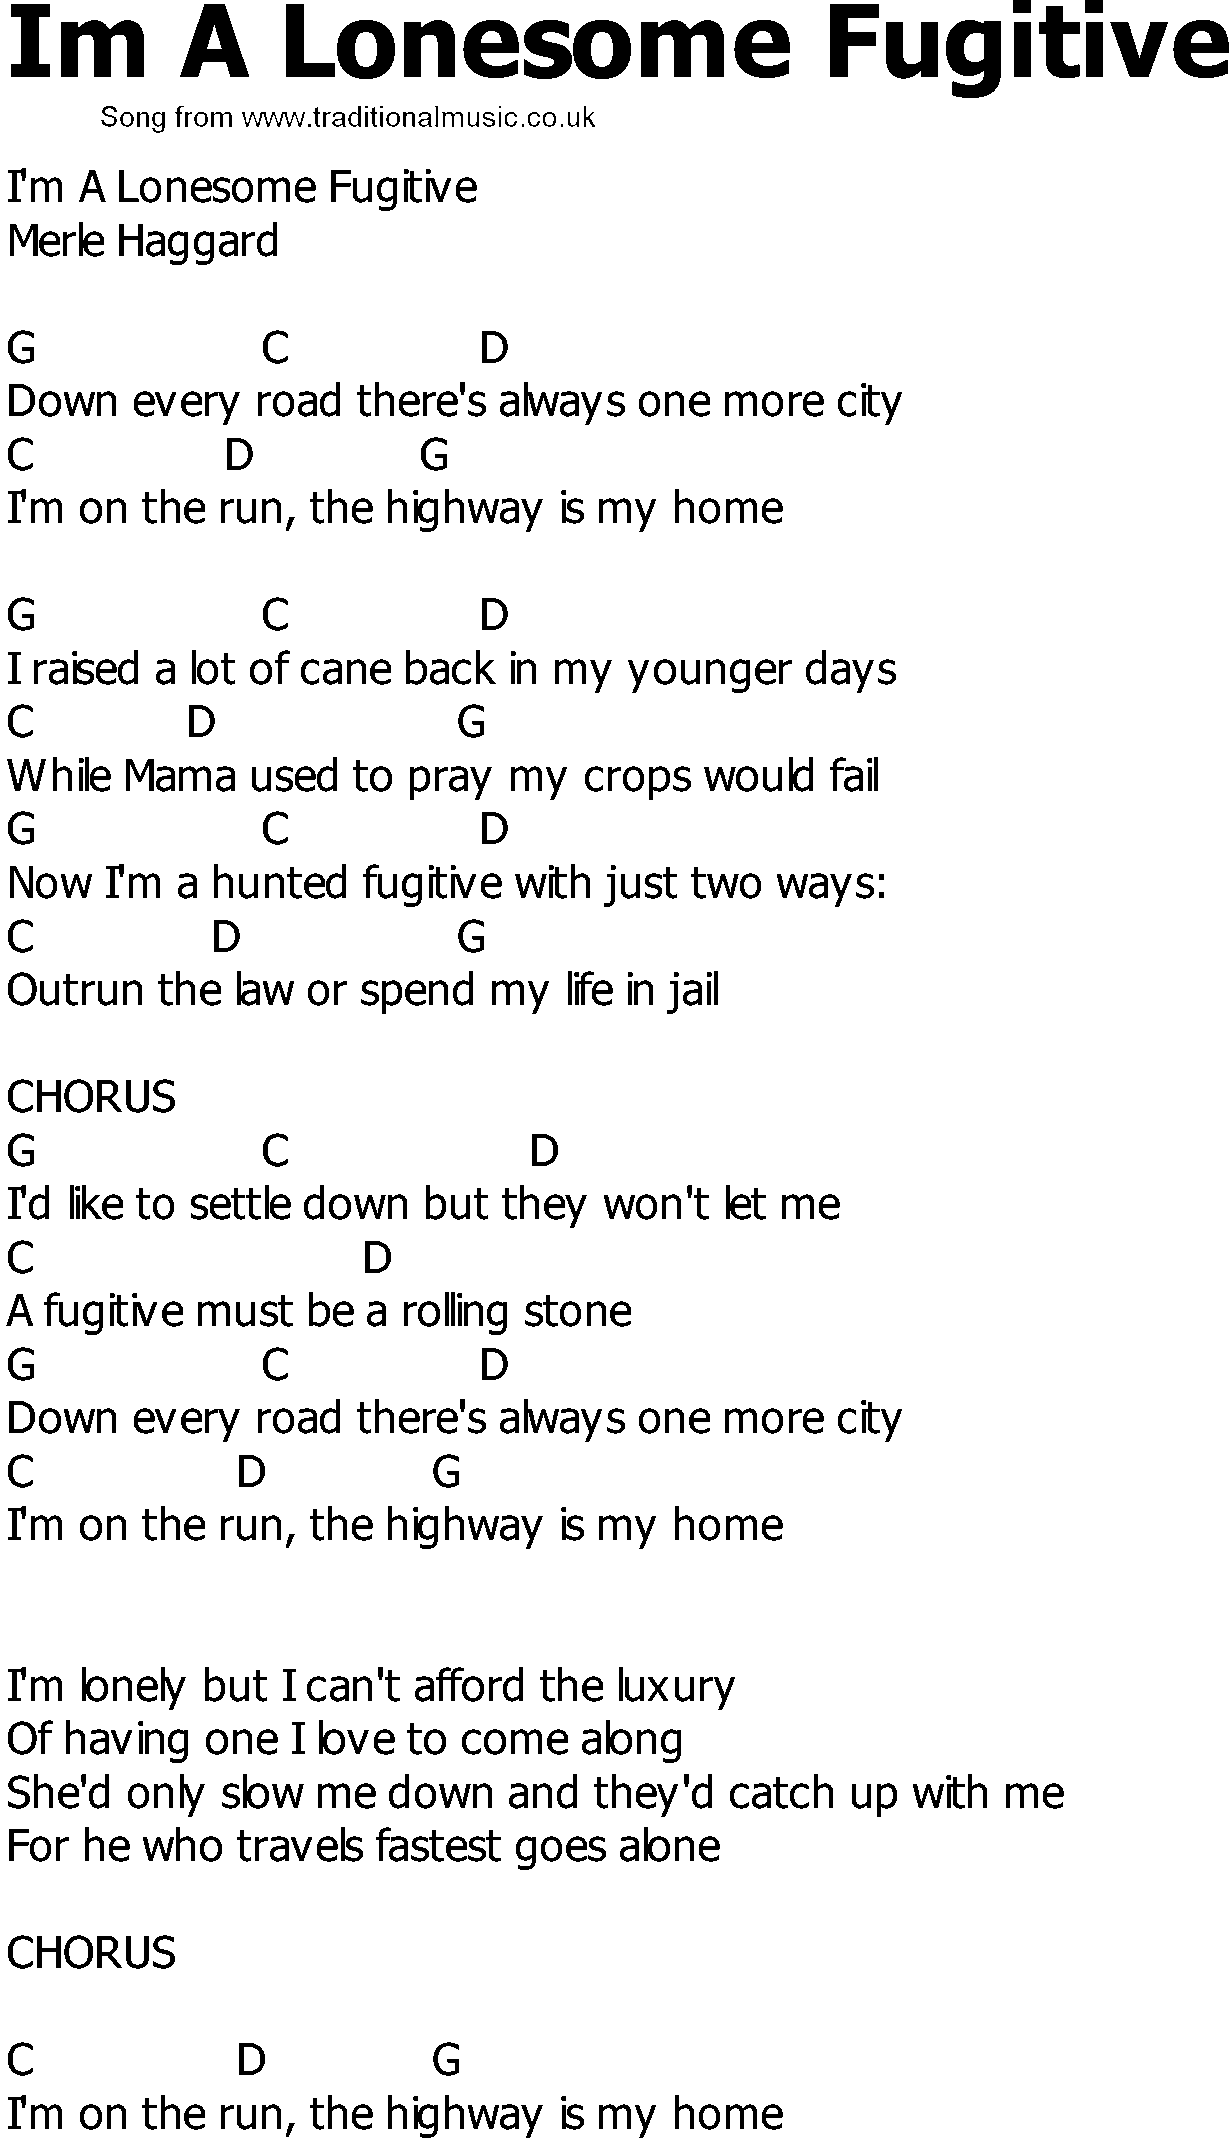 Old Country song lyrics with chords - Im A Lonesome Fugitive